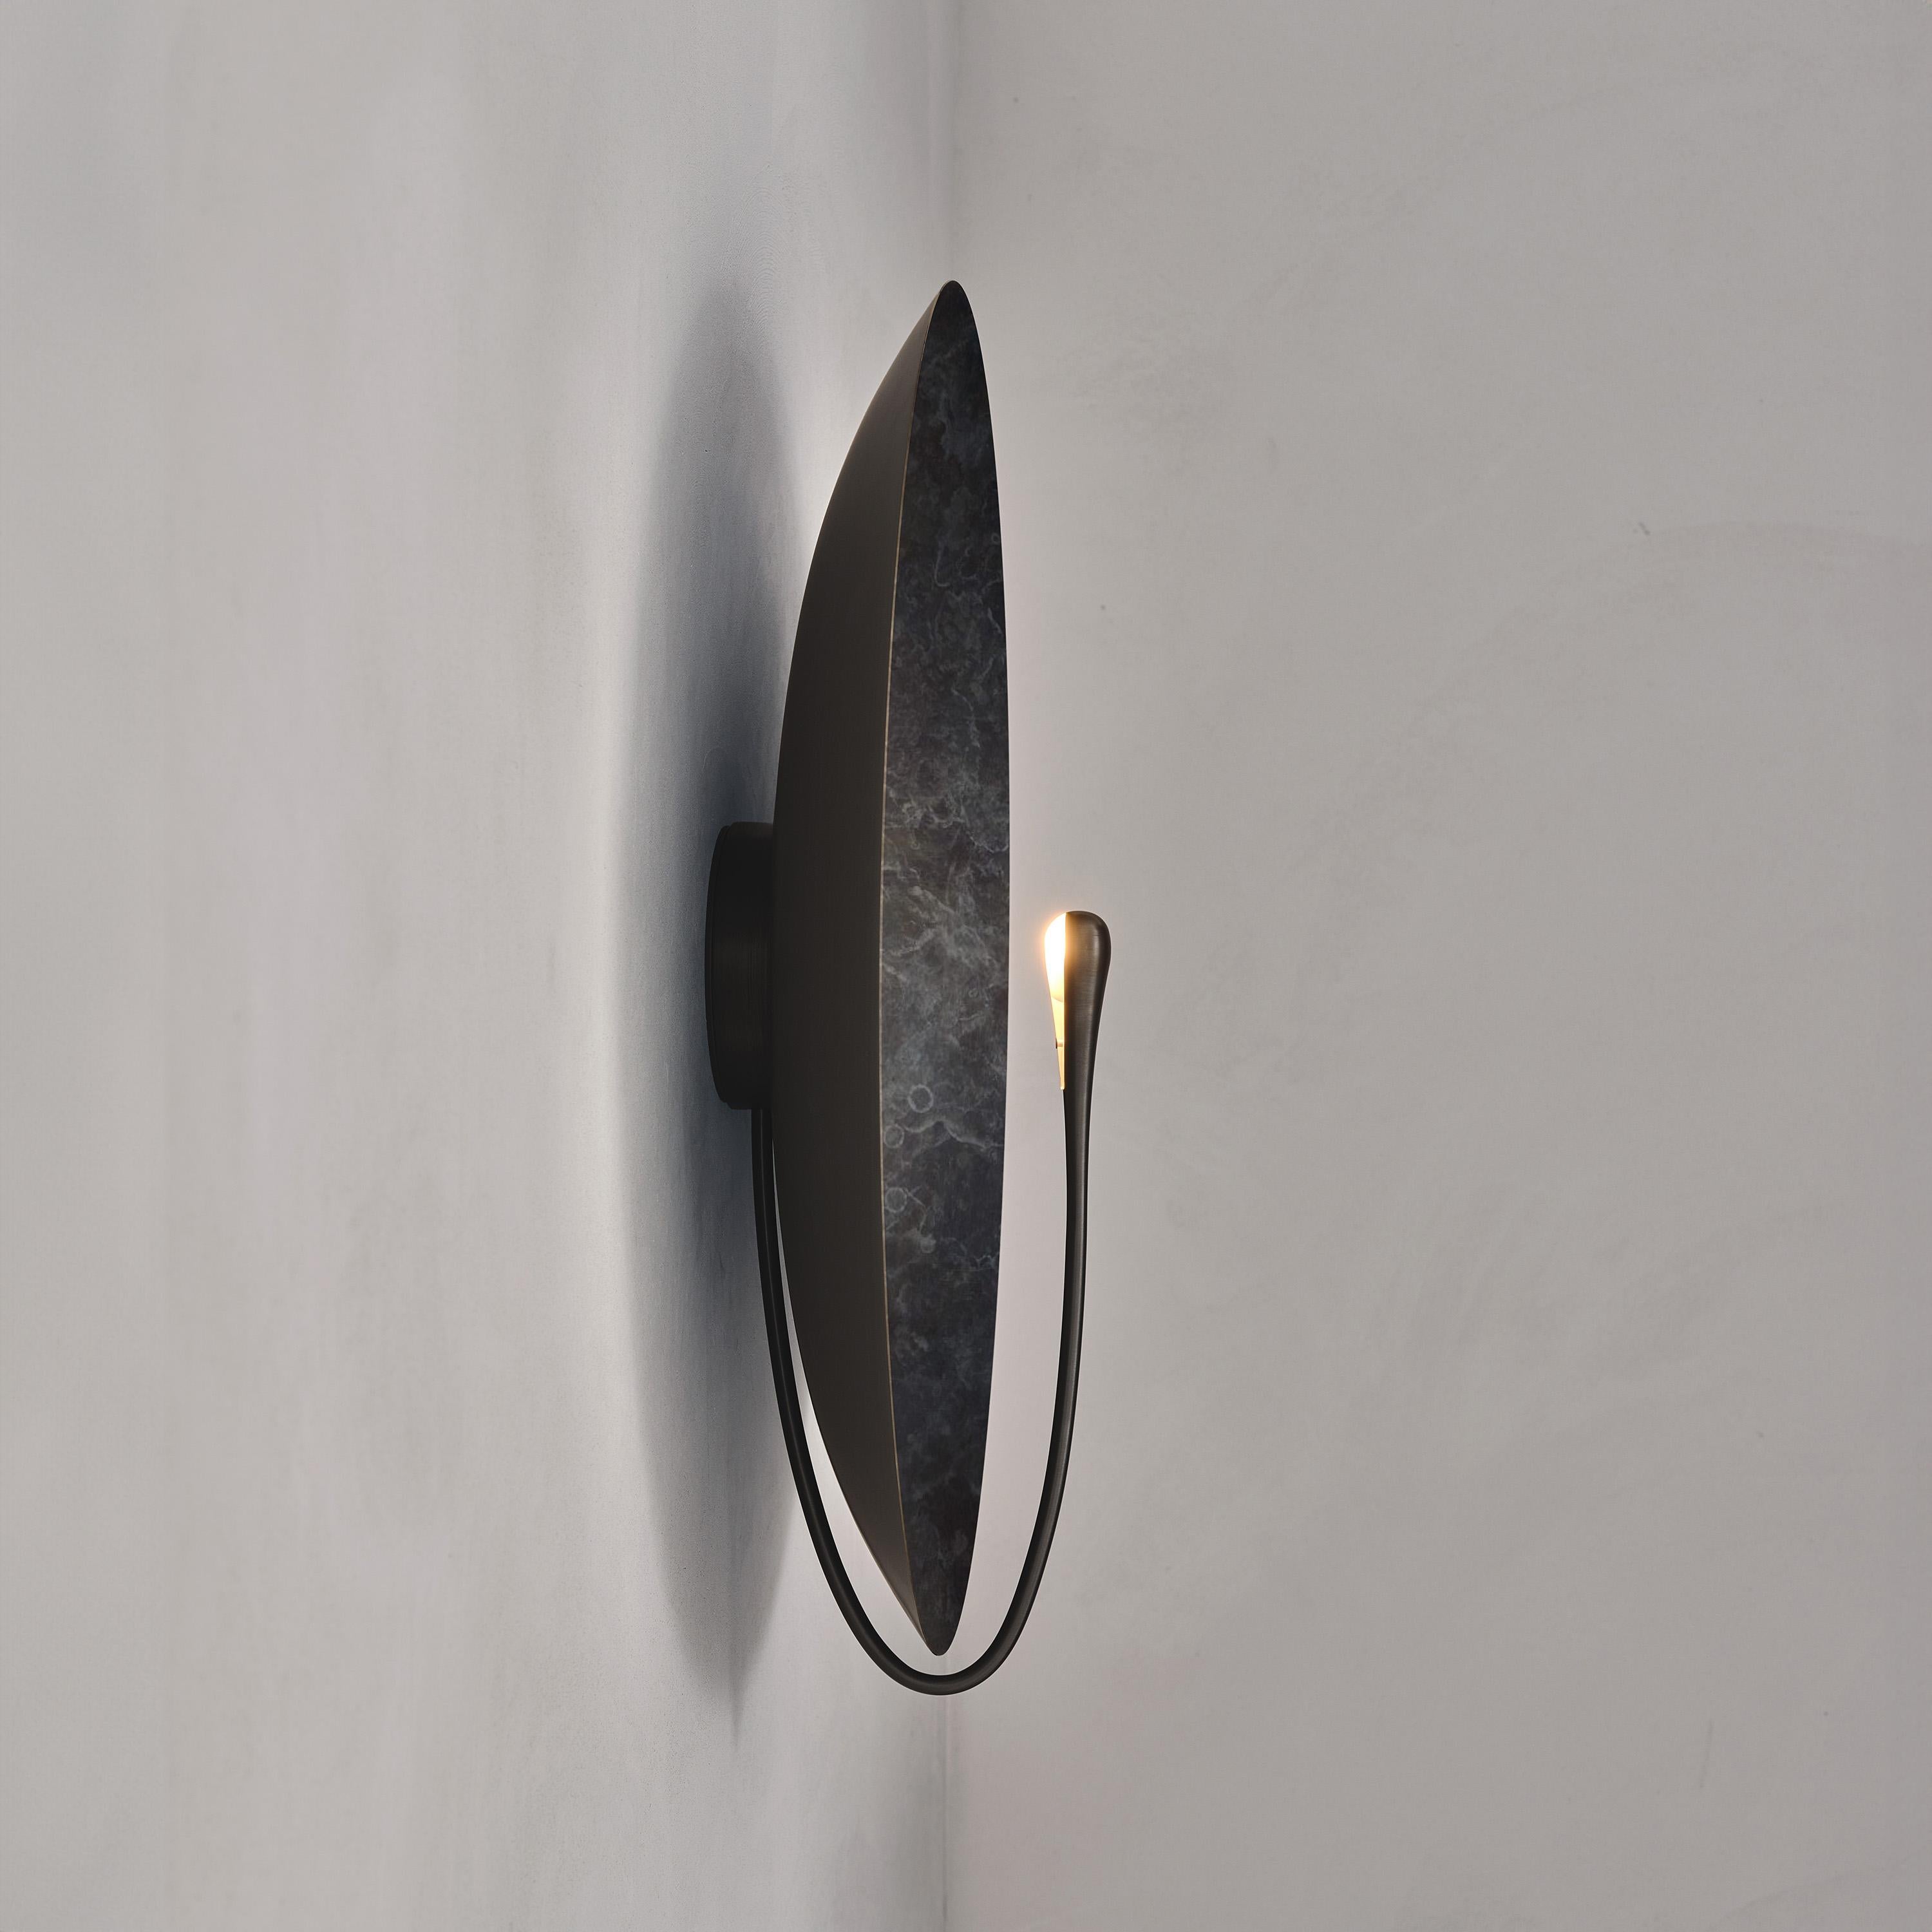 British 'Cosmic Callisto XL' Handmade Patinated Brass Contemporary Wall Light Sconce For Sale